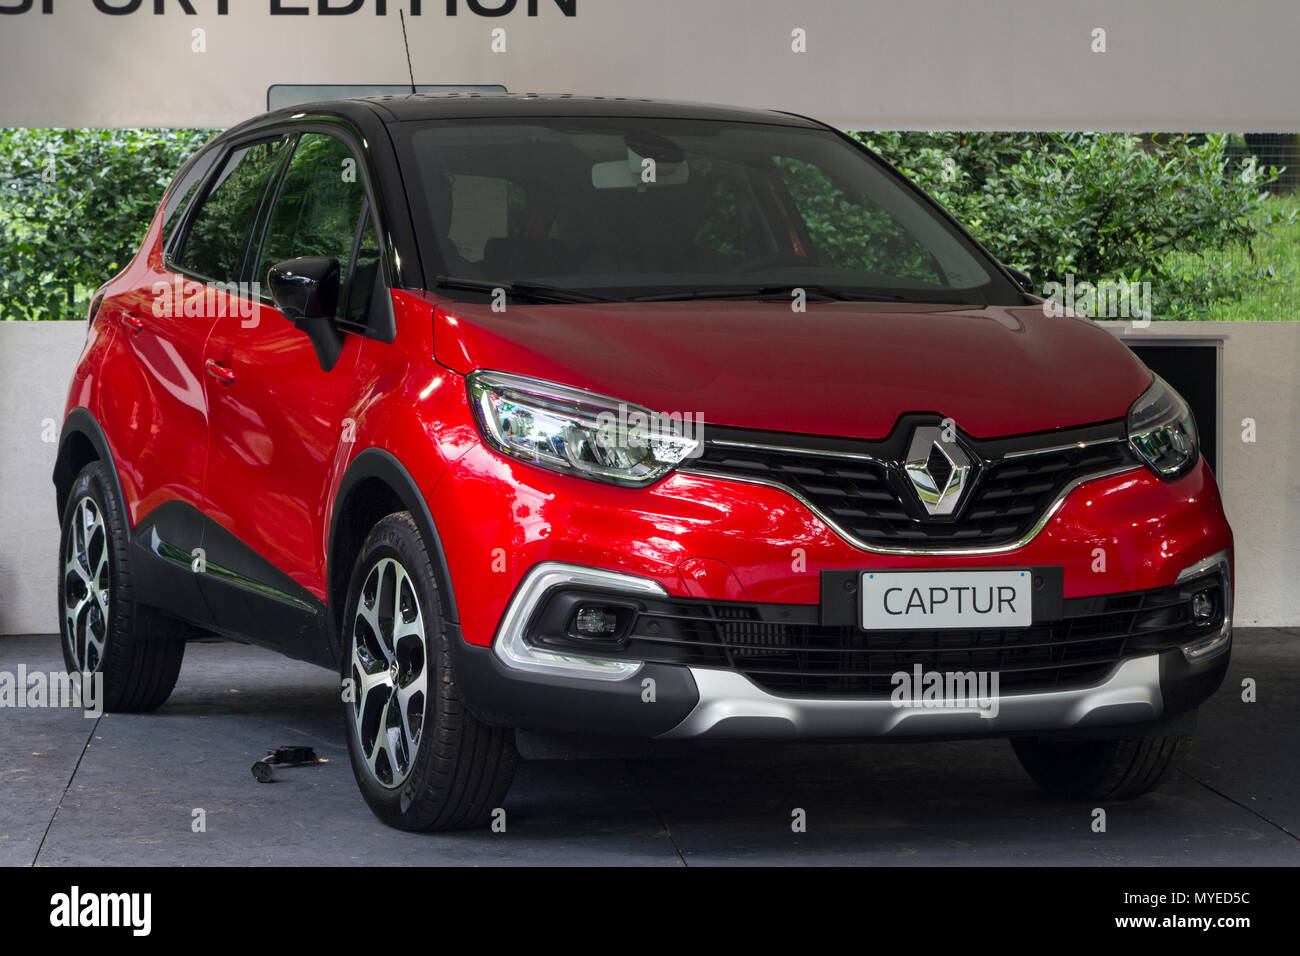 Torino, Italy. 7th June 2018. A red Renault Captur. 2018 edition of Parco Valentino car show hosts cars by many automobile manufacturers and car designers inside Valentino Park in Torino, Italy Credit: Marco Destefanis/Alamy Live News Stock Photo